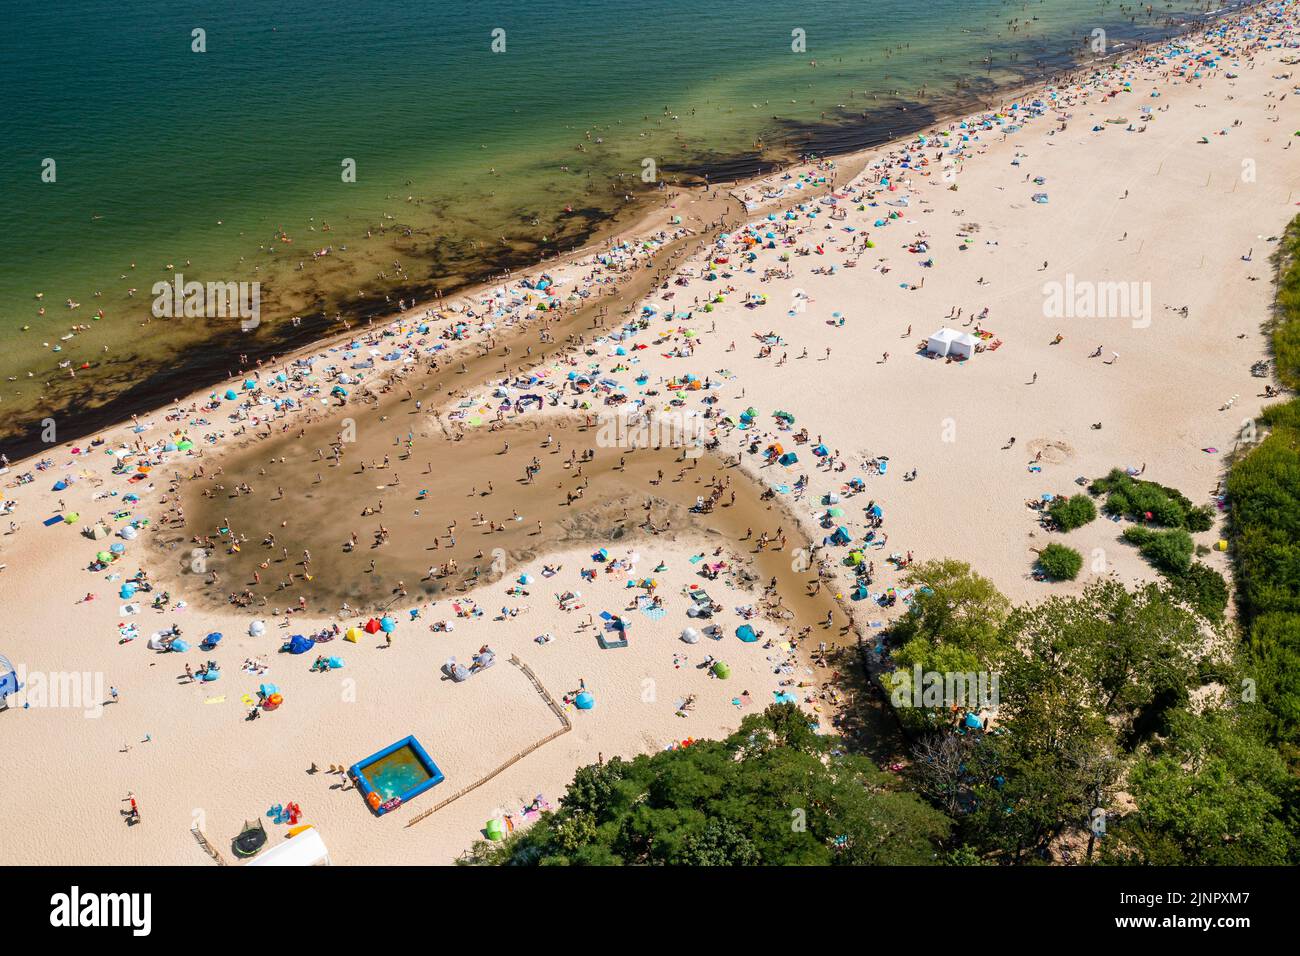 Baltic coast, people having bath in the sea and in the Oliwski stream mouth to the sea during hot summertime weekend Stock Photo